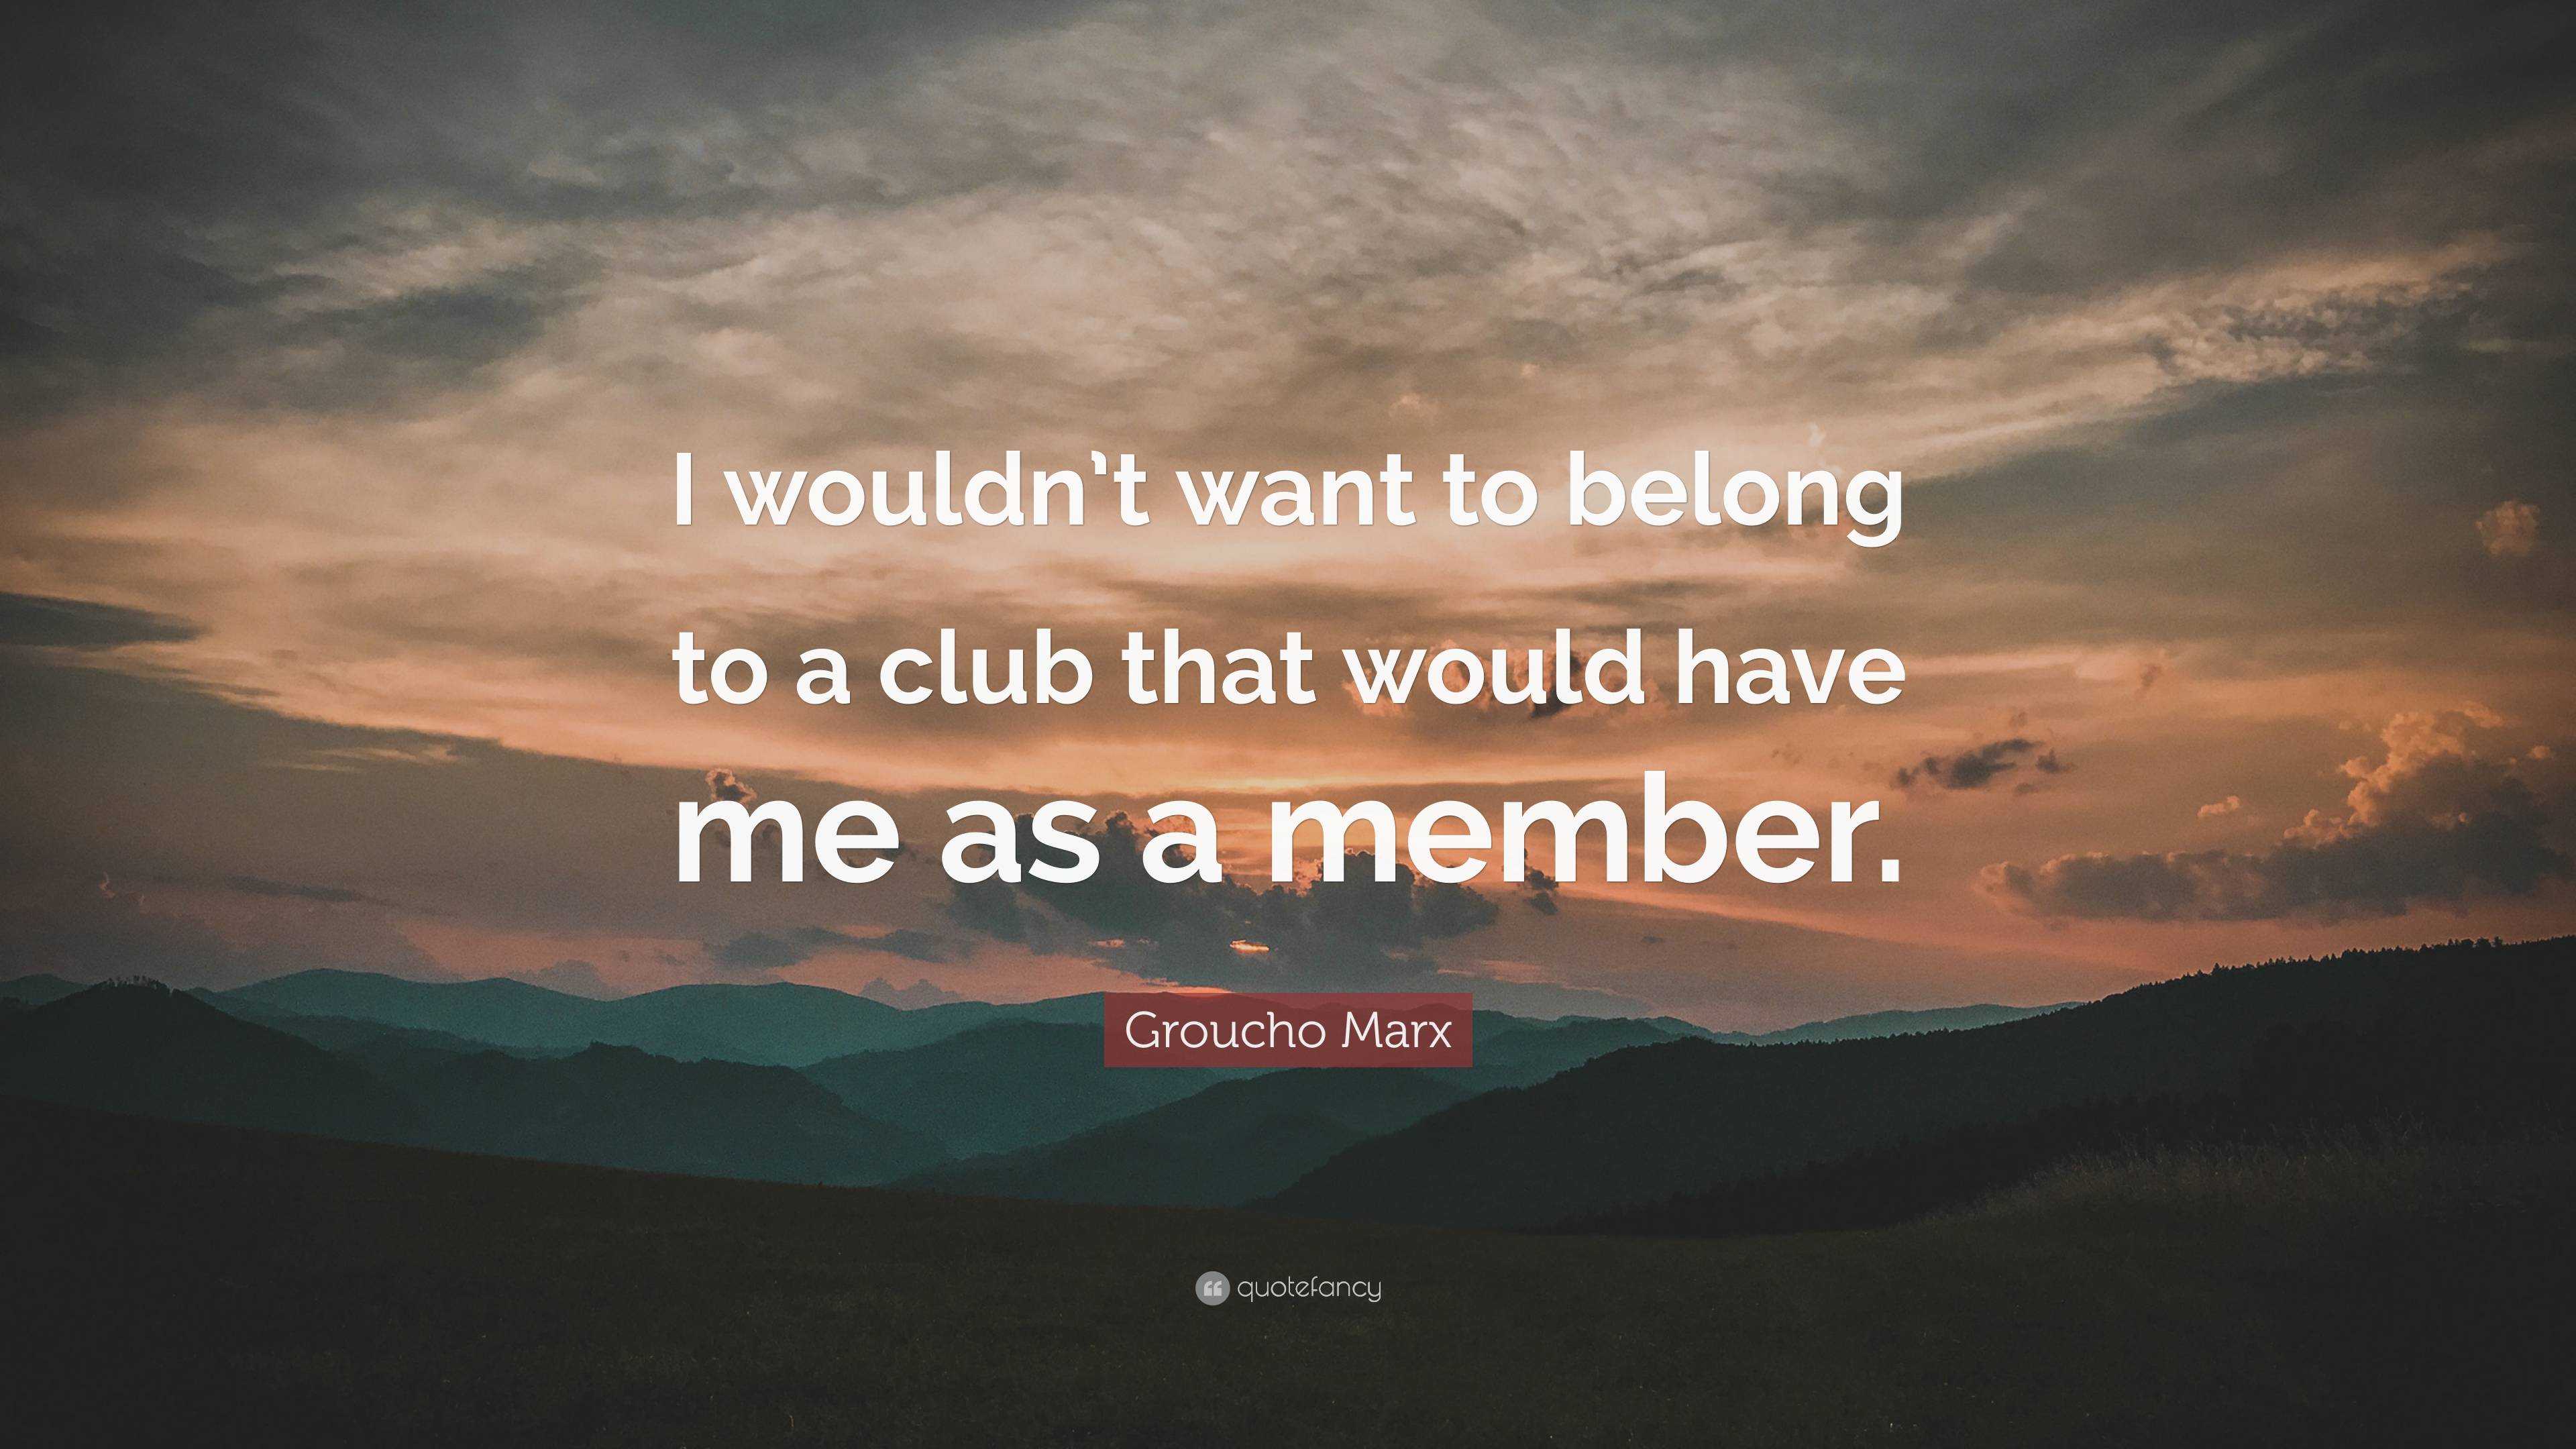 Groucho Marx Quote: “I wouldn't want to belong to a club that would have me